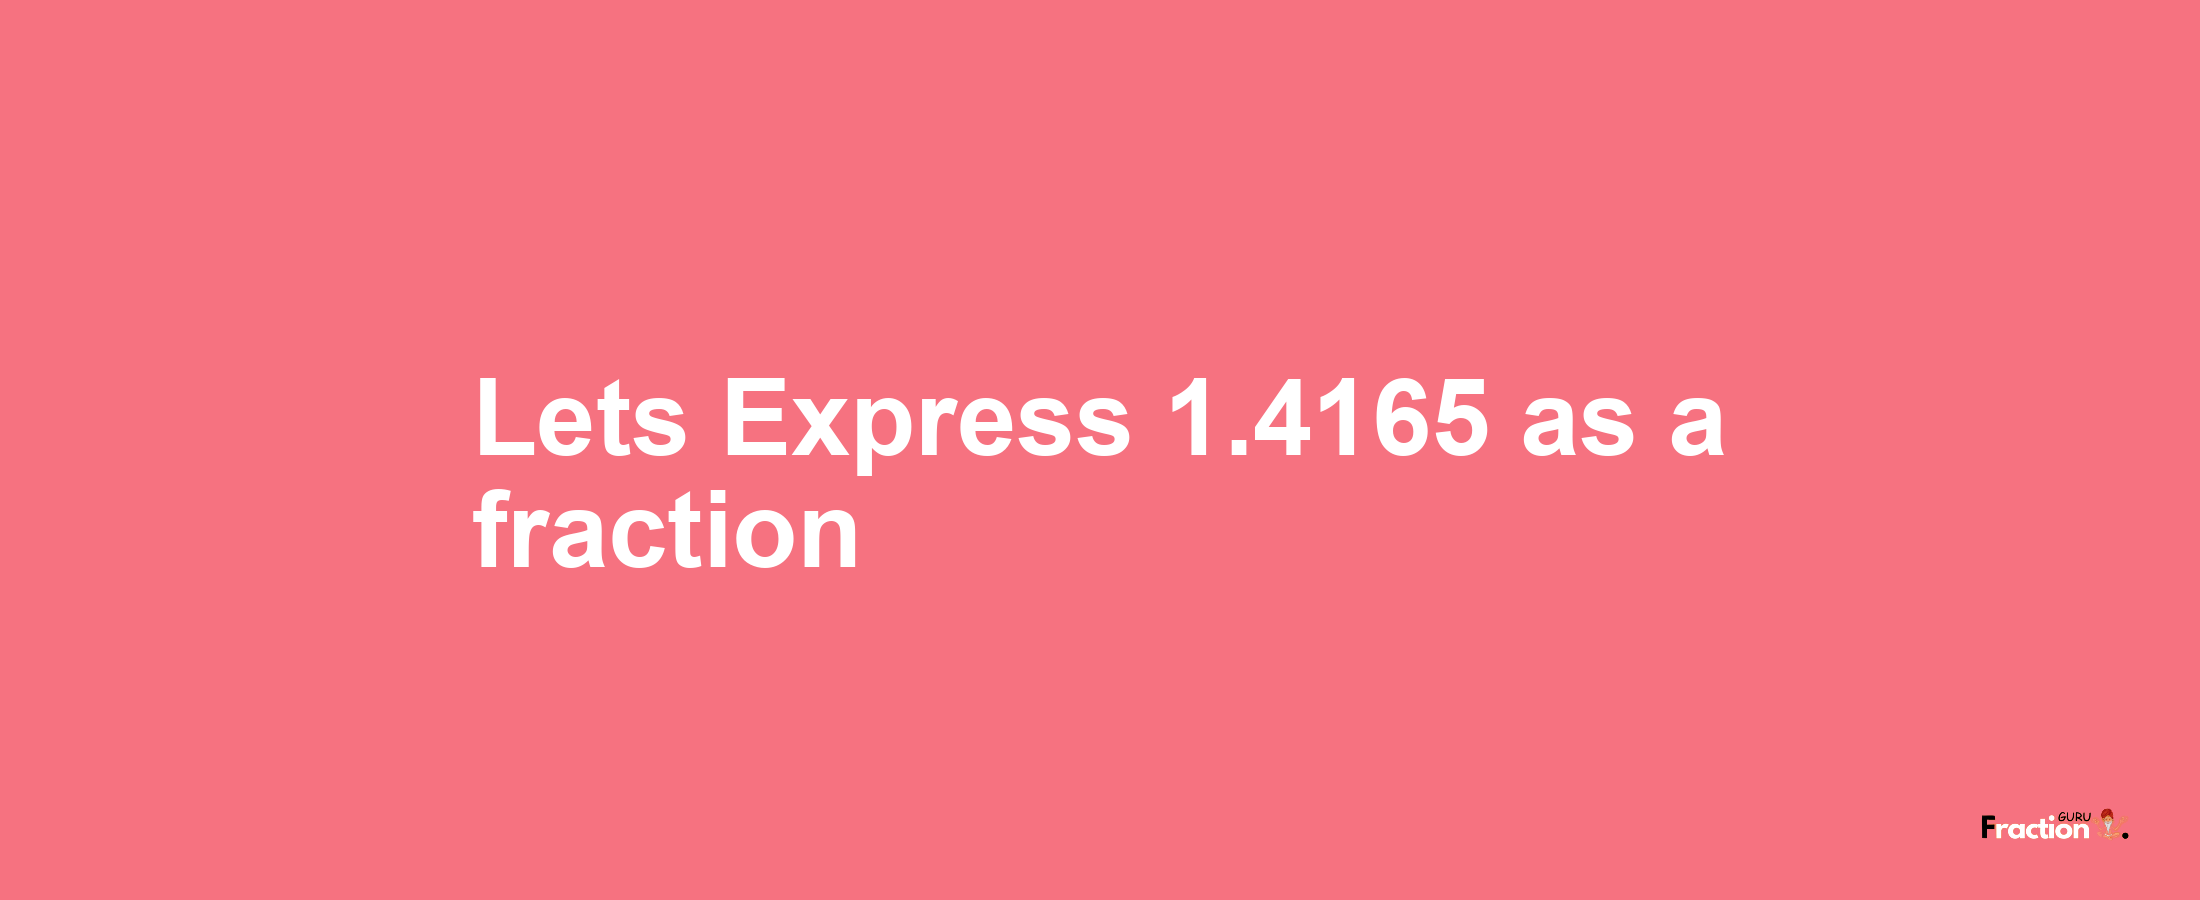 Lets Express 1.4165 as afraction